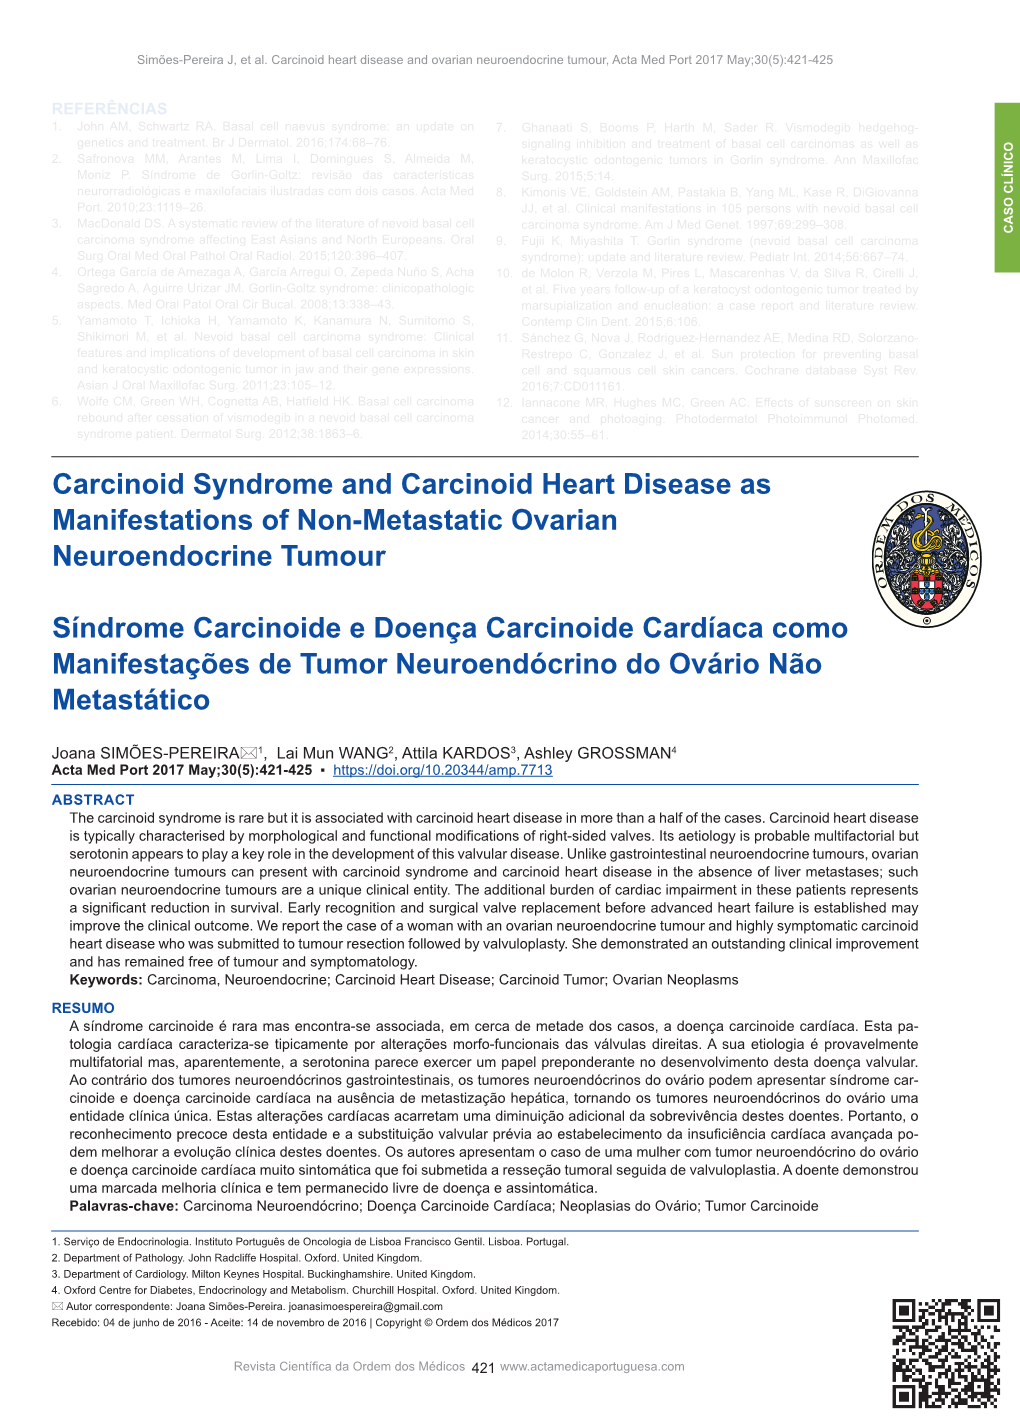 Carcinoid Syndrome and Carcinoid Heart Disease As Manifestations Of